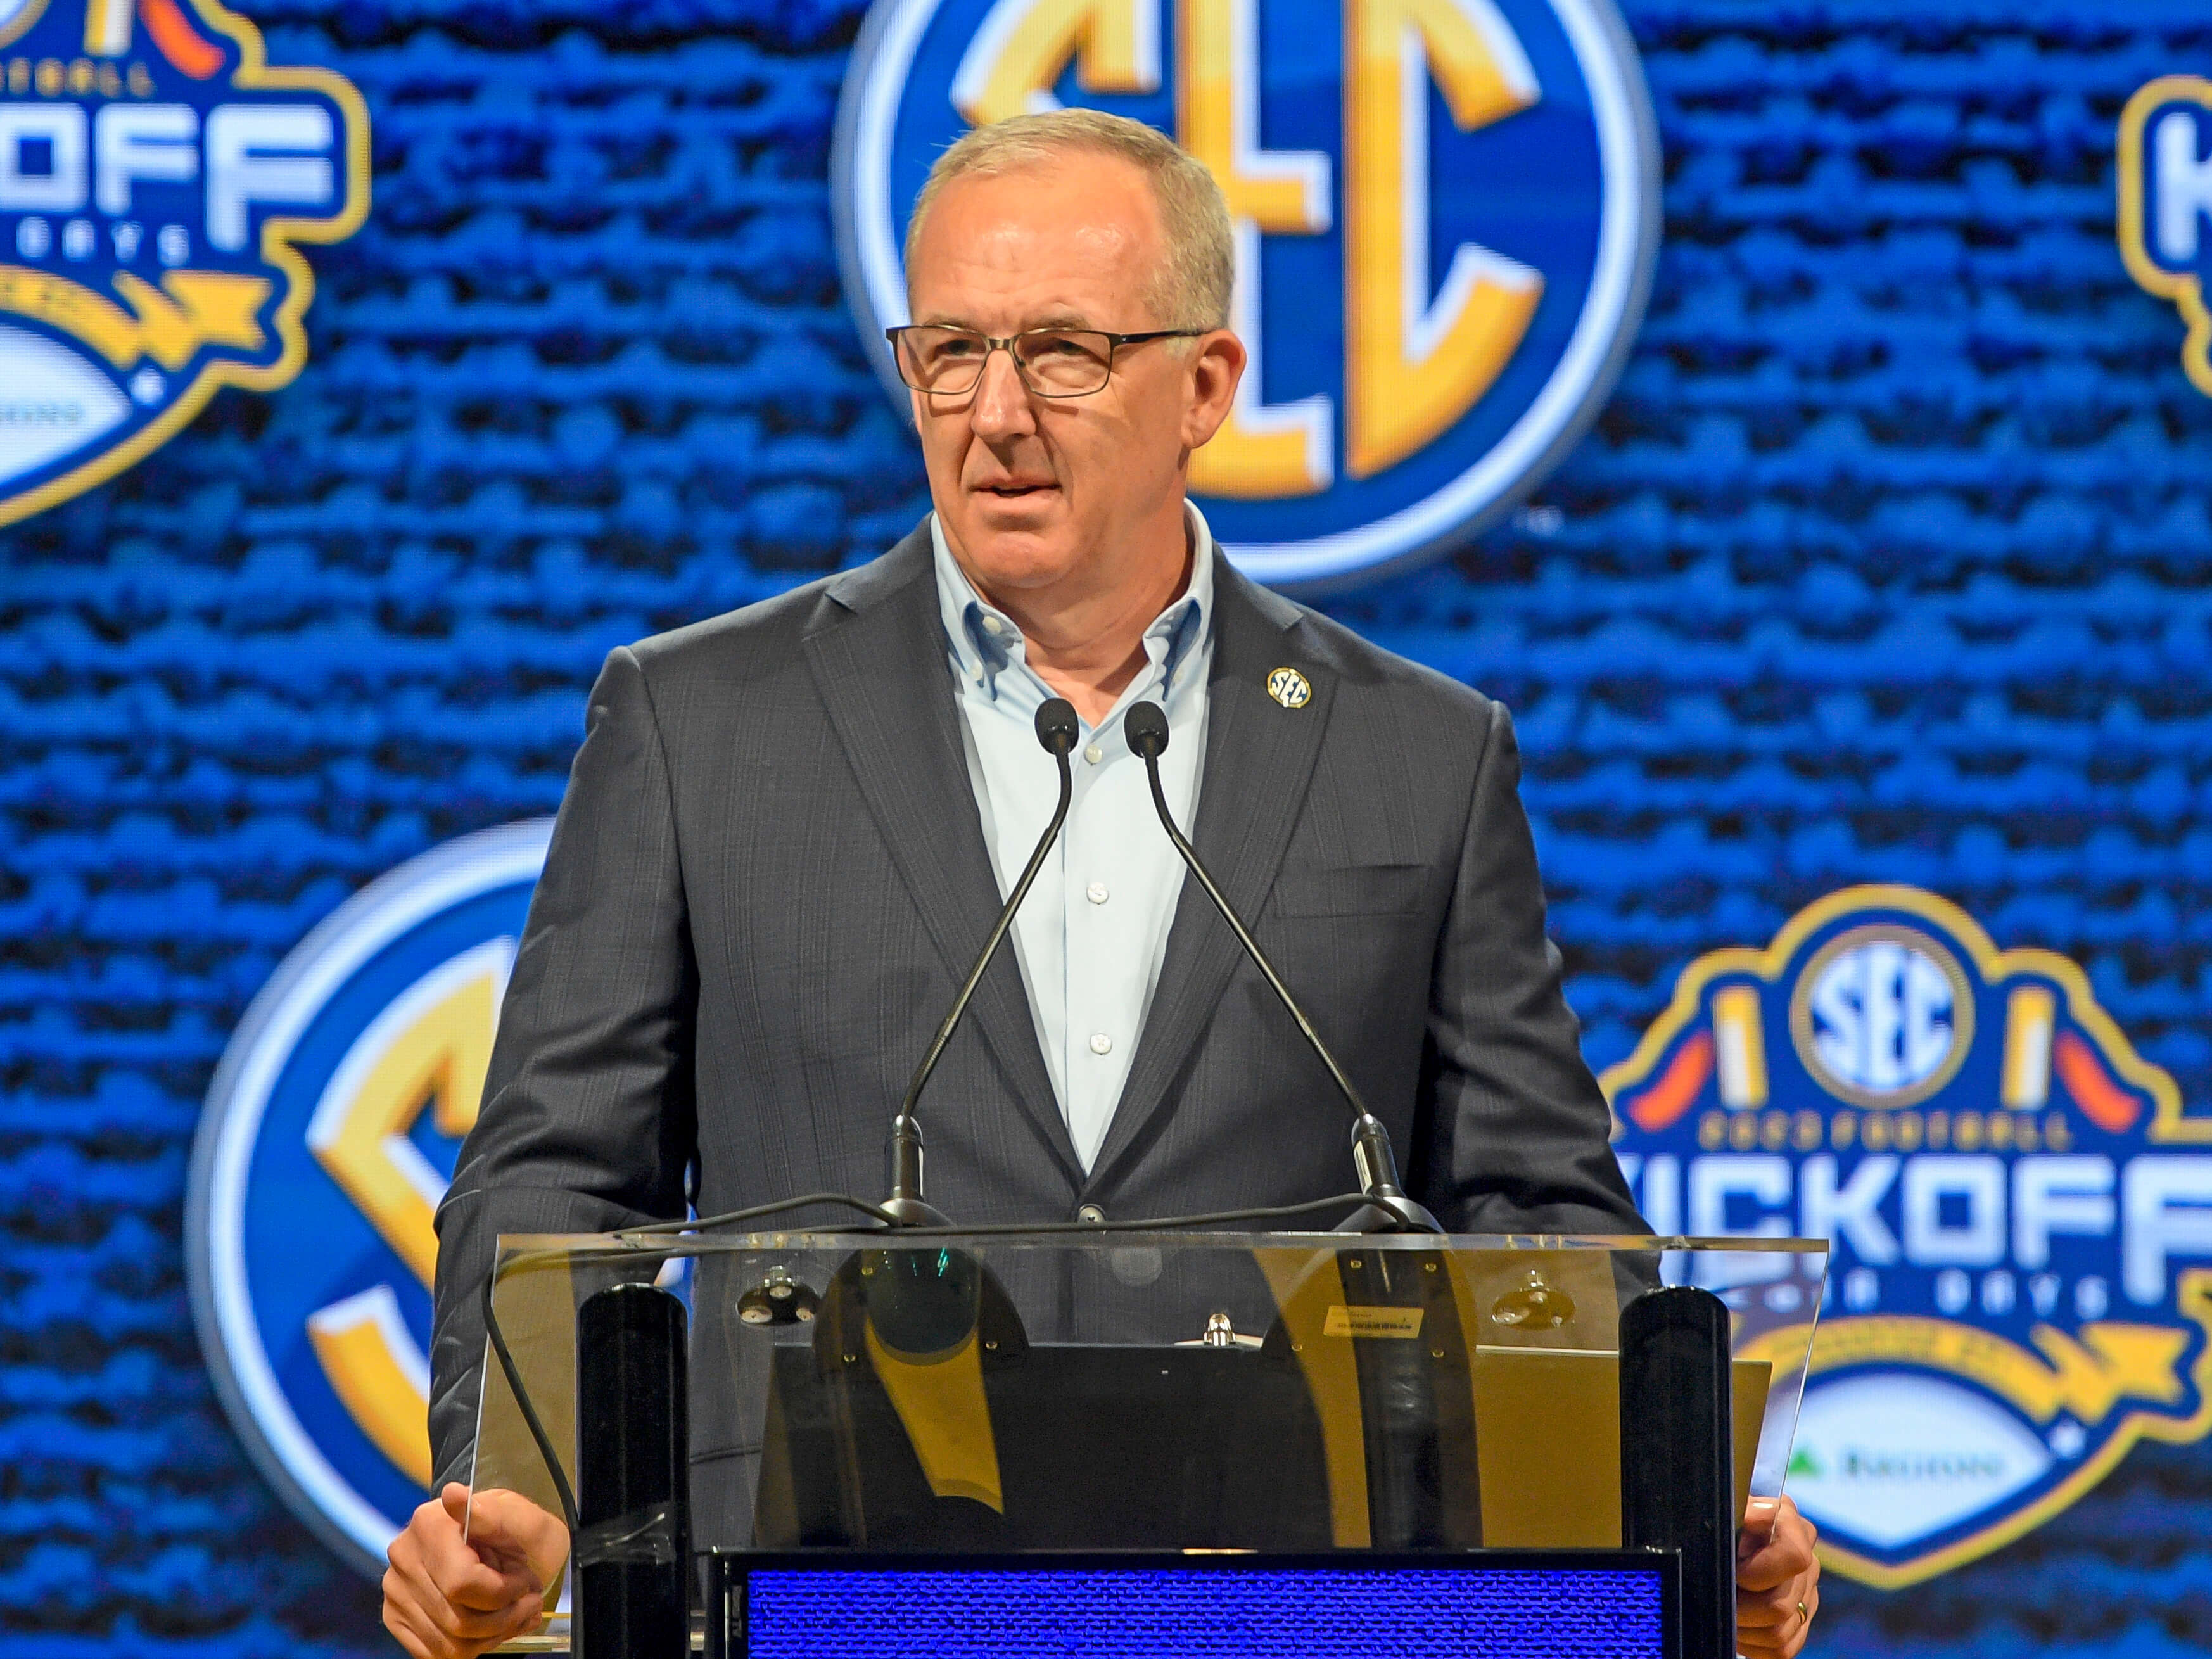 How To Bet - SEC Commissioner Isn’t Ready for Conference Decision on NCAA’s College Player Prop Ban Push